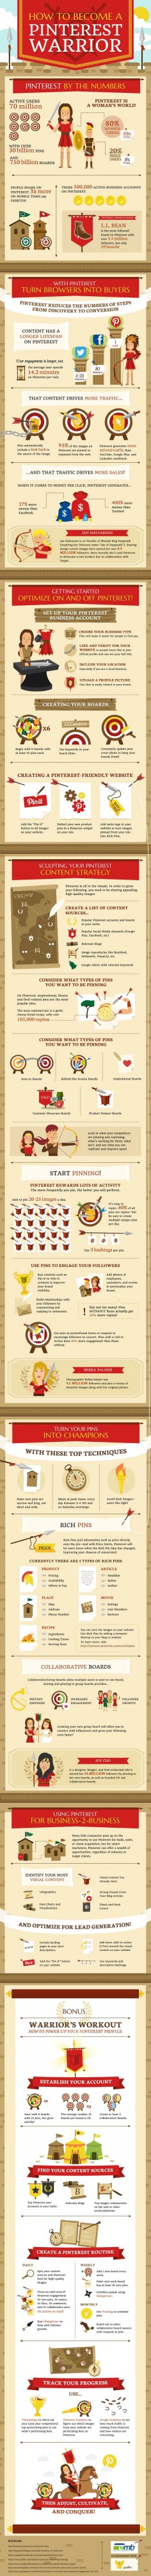 How To Become A Pinterest Warrior - #infographic